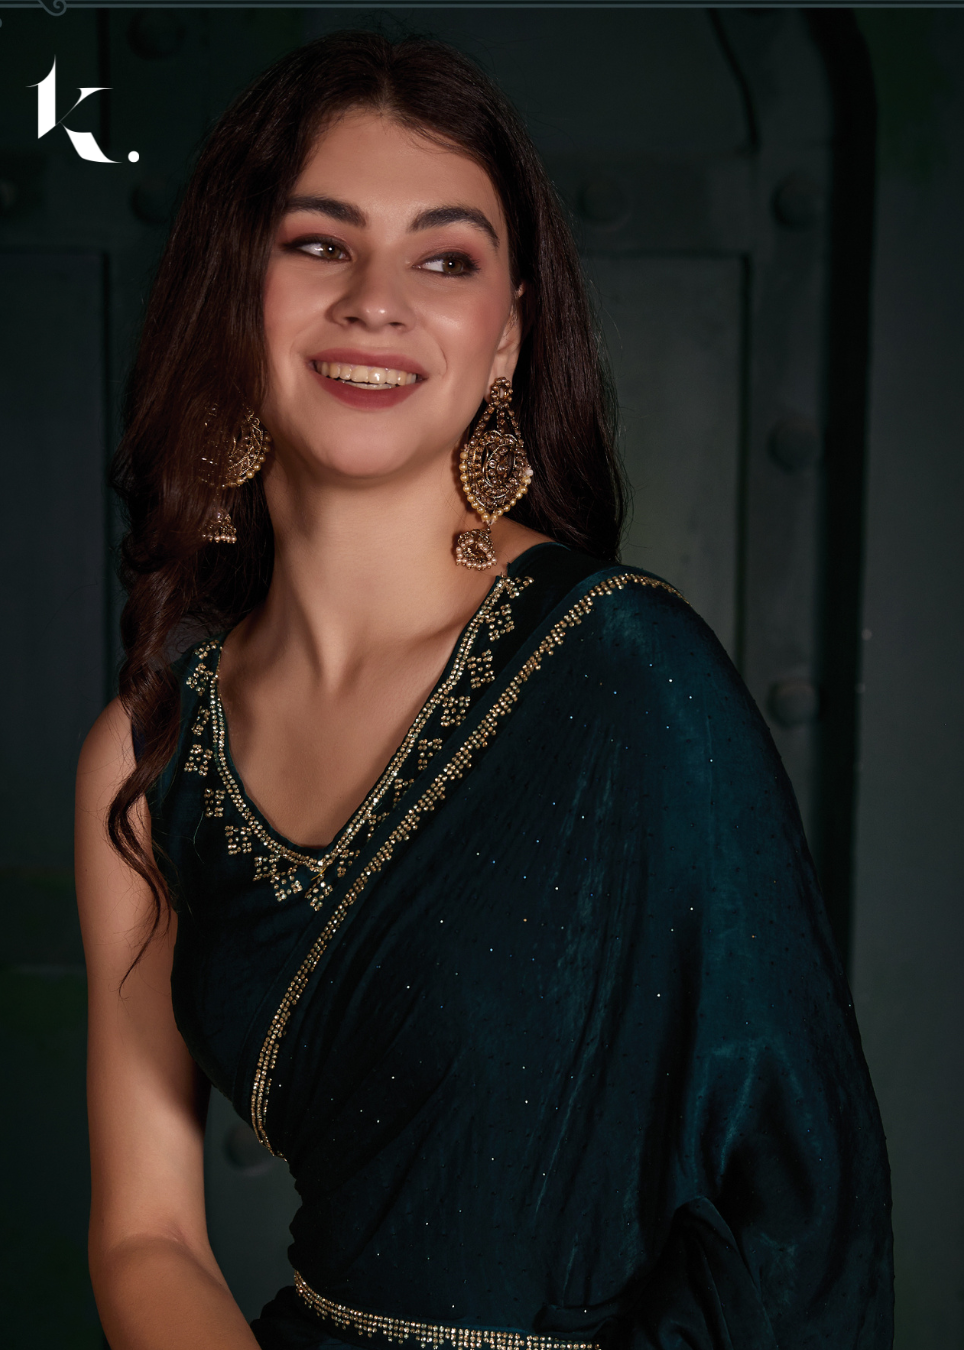 Teal Green Imported Velvet Fabric With Swarovski Work Sprinkled All Over The Body And Handwork Zircon Border Saree